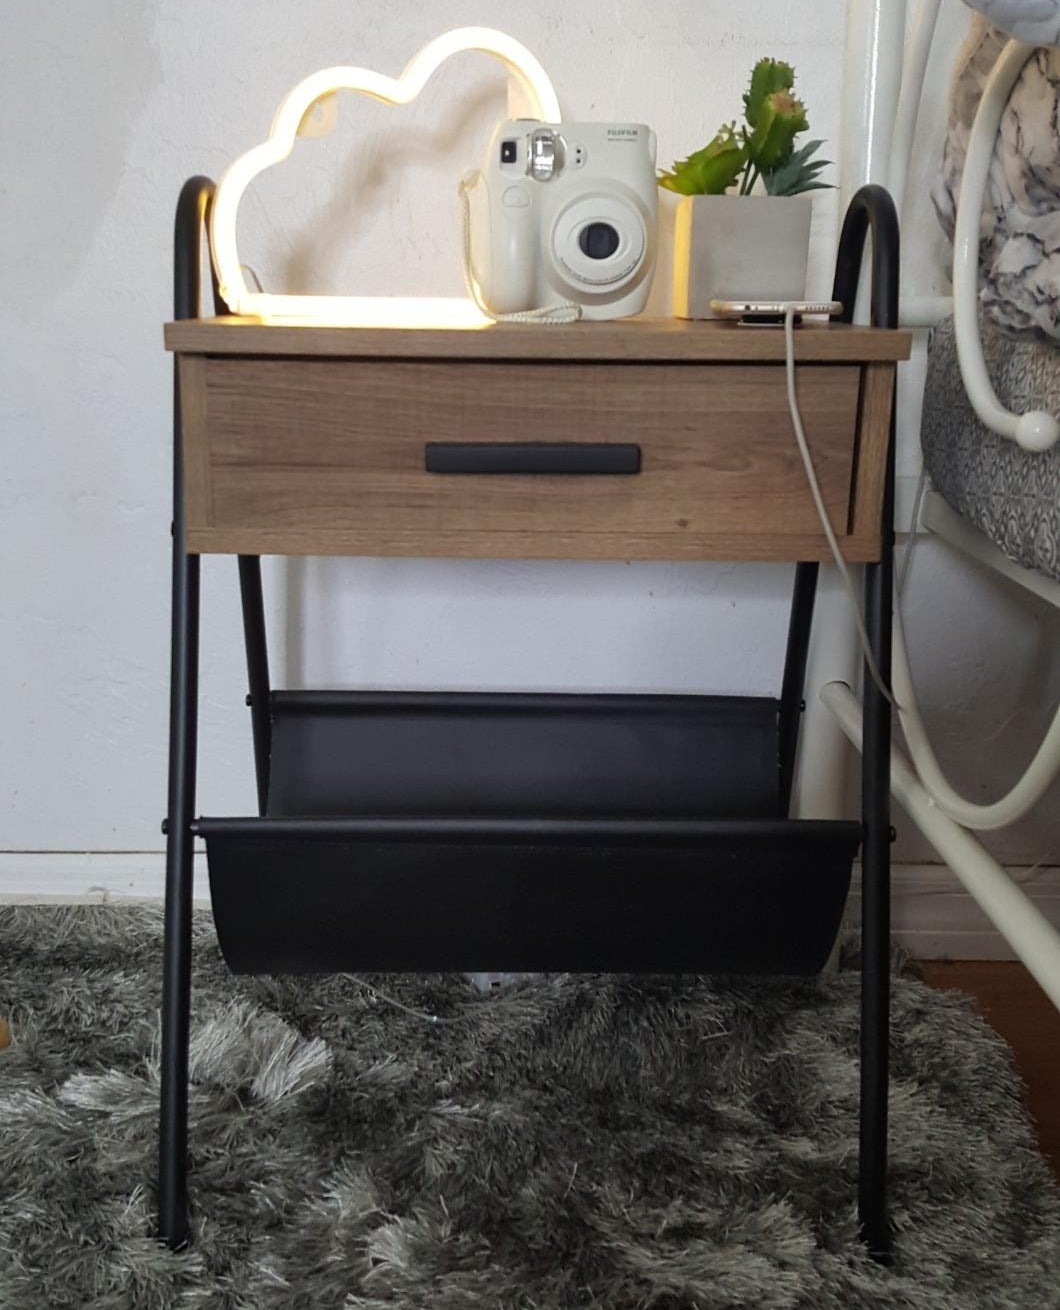 The wooden table with a metal frame, one drawer and a leather hammock underneath